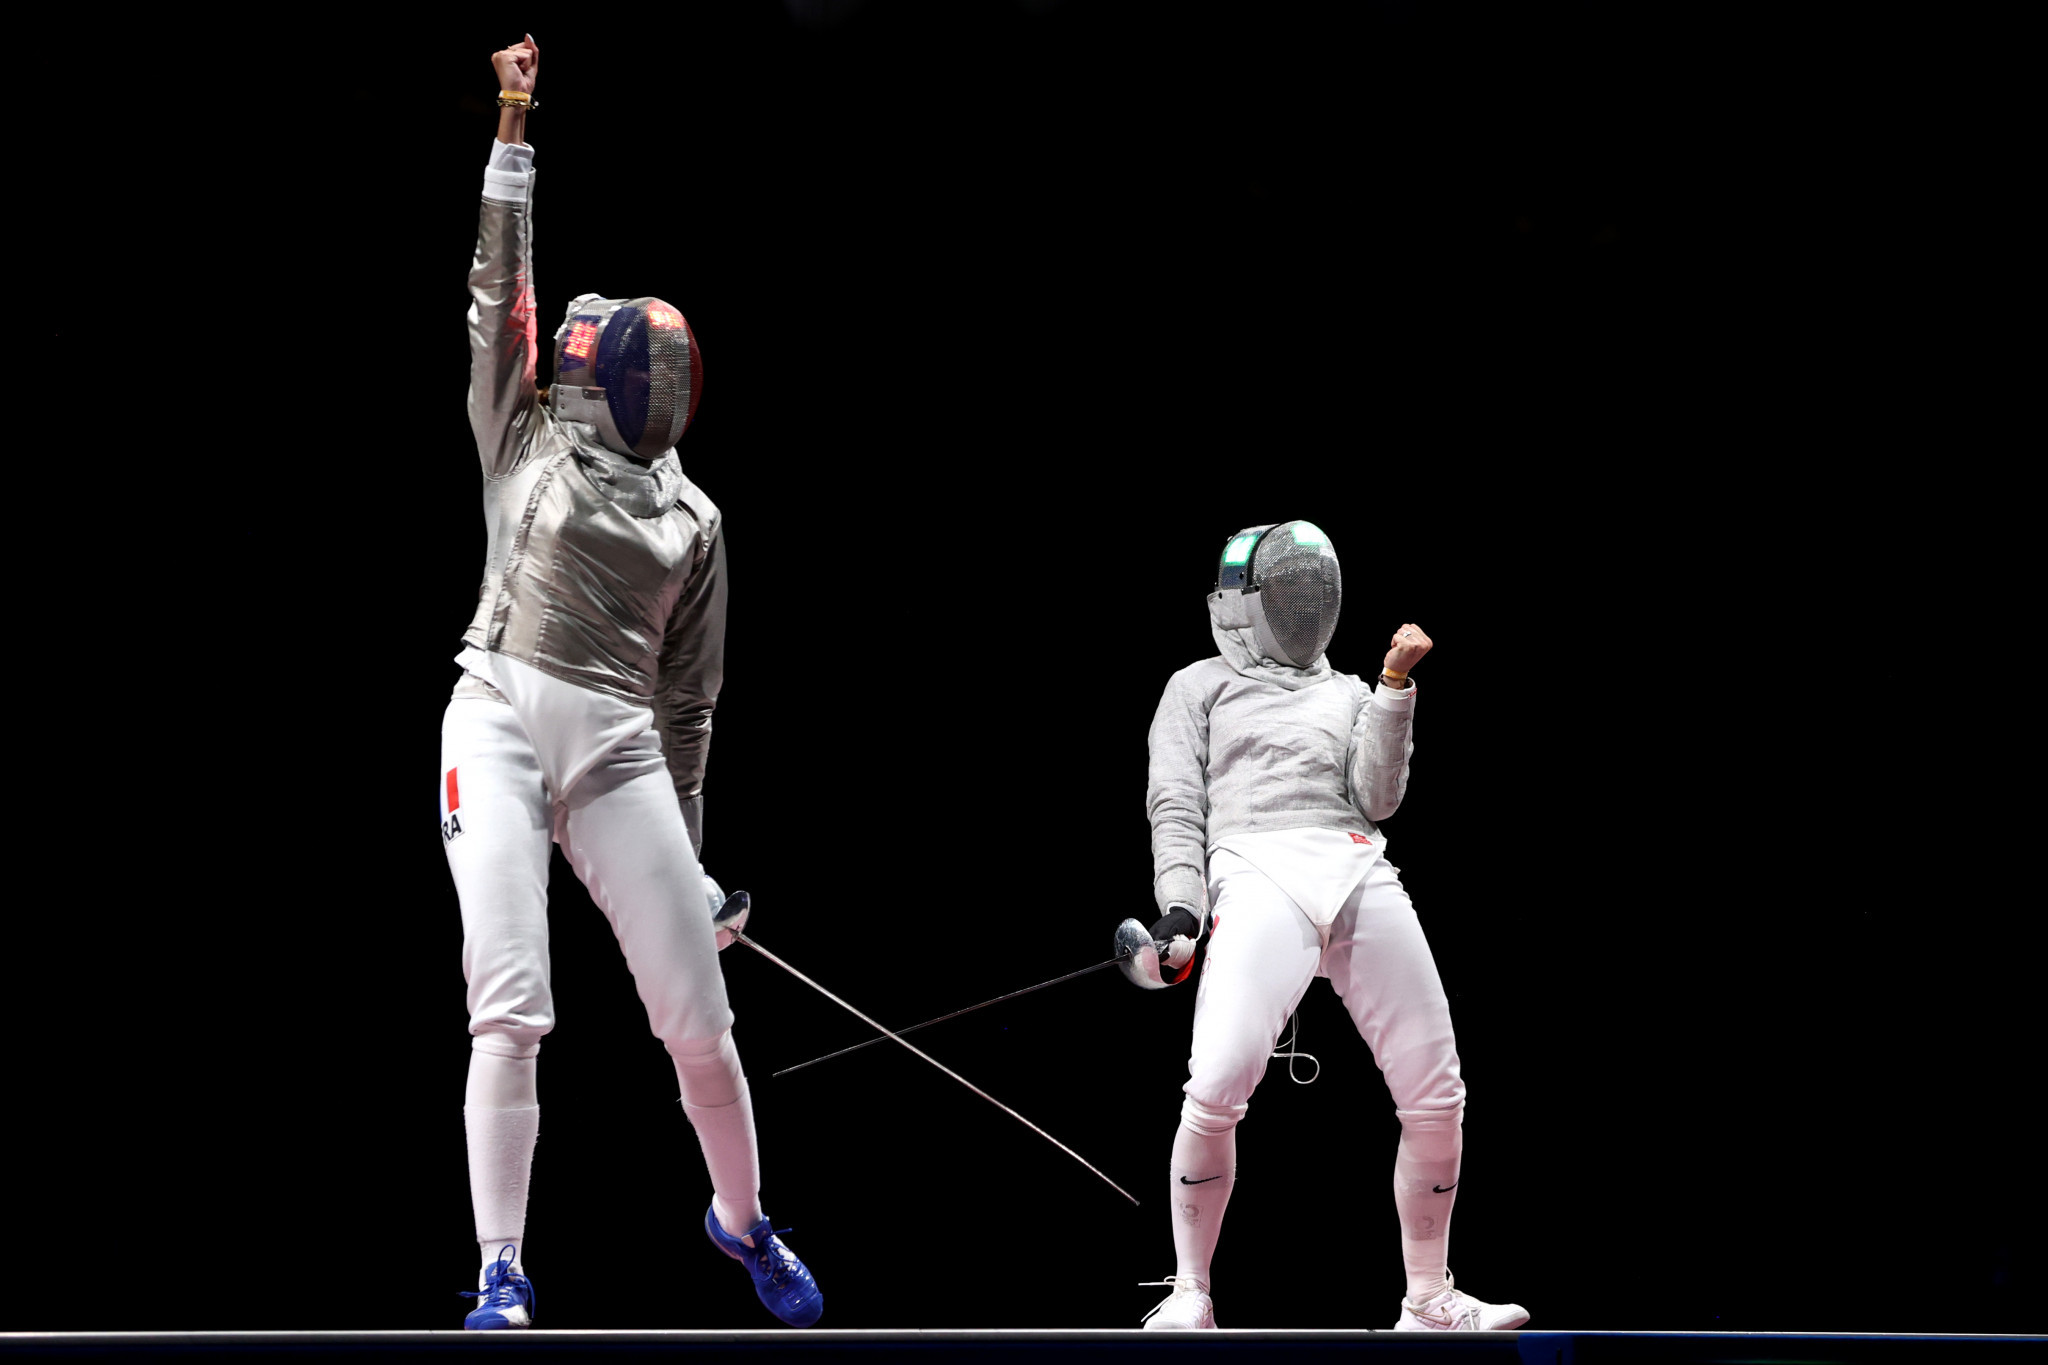 Sara Balzer, left, won the women's individual crown at the FIE Sabre World Cup in Batumi ©Getty Images